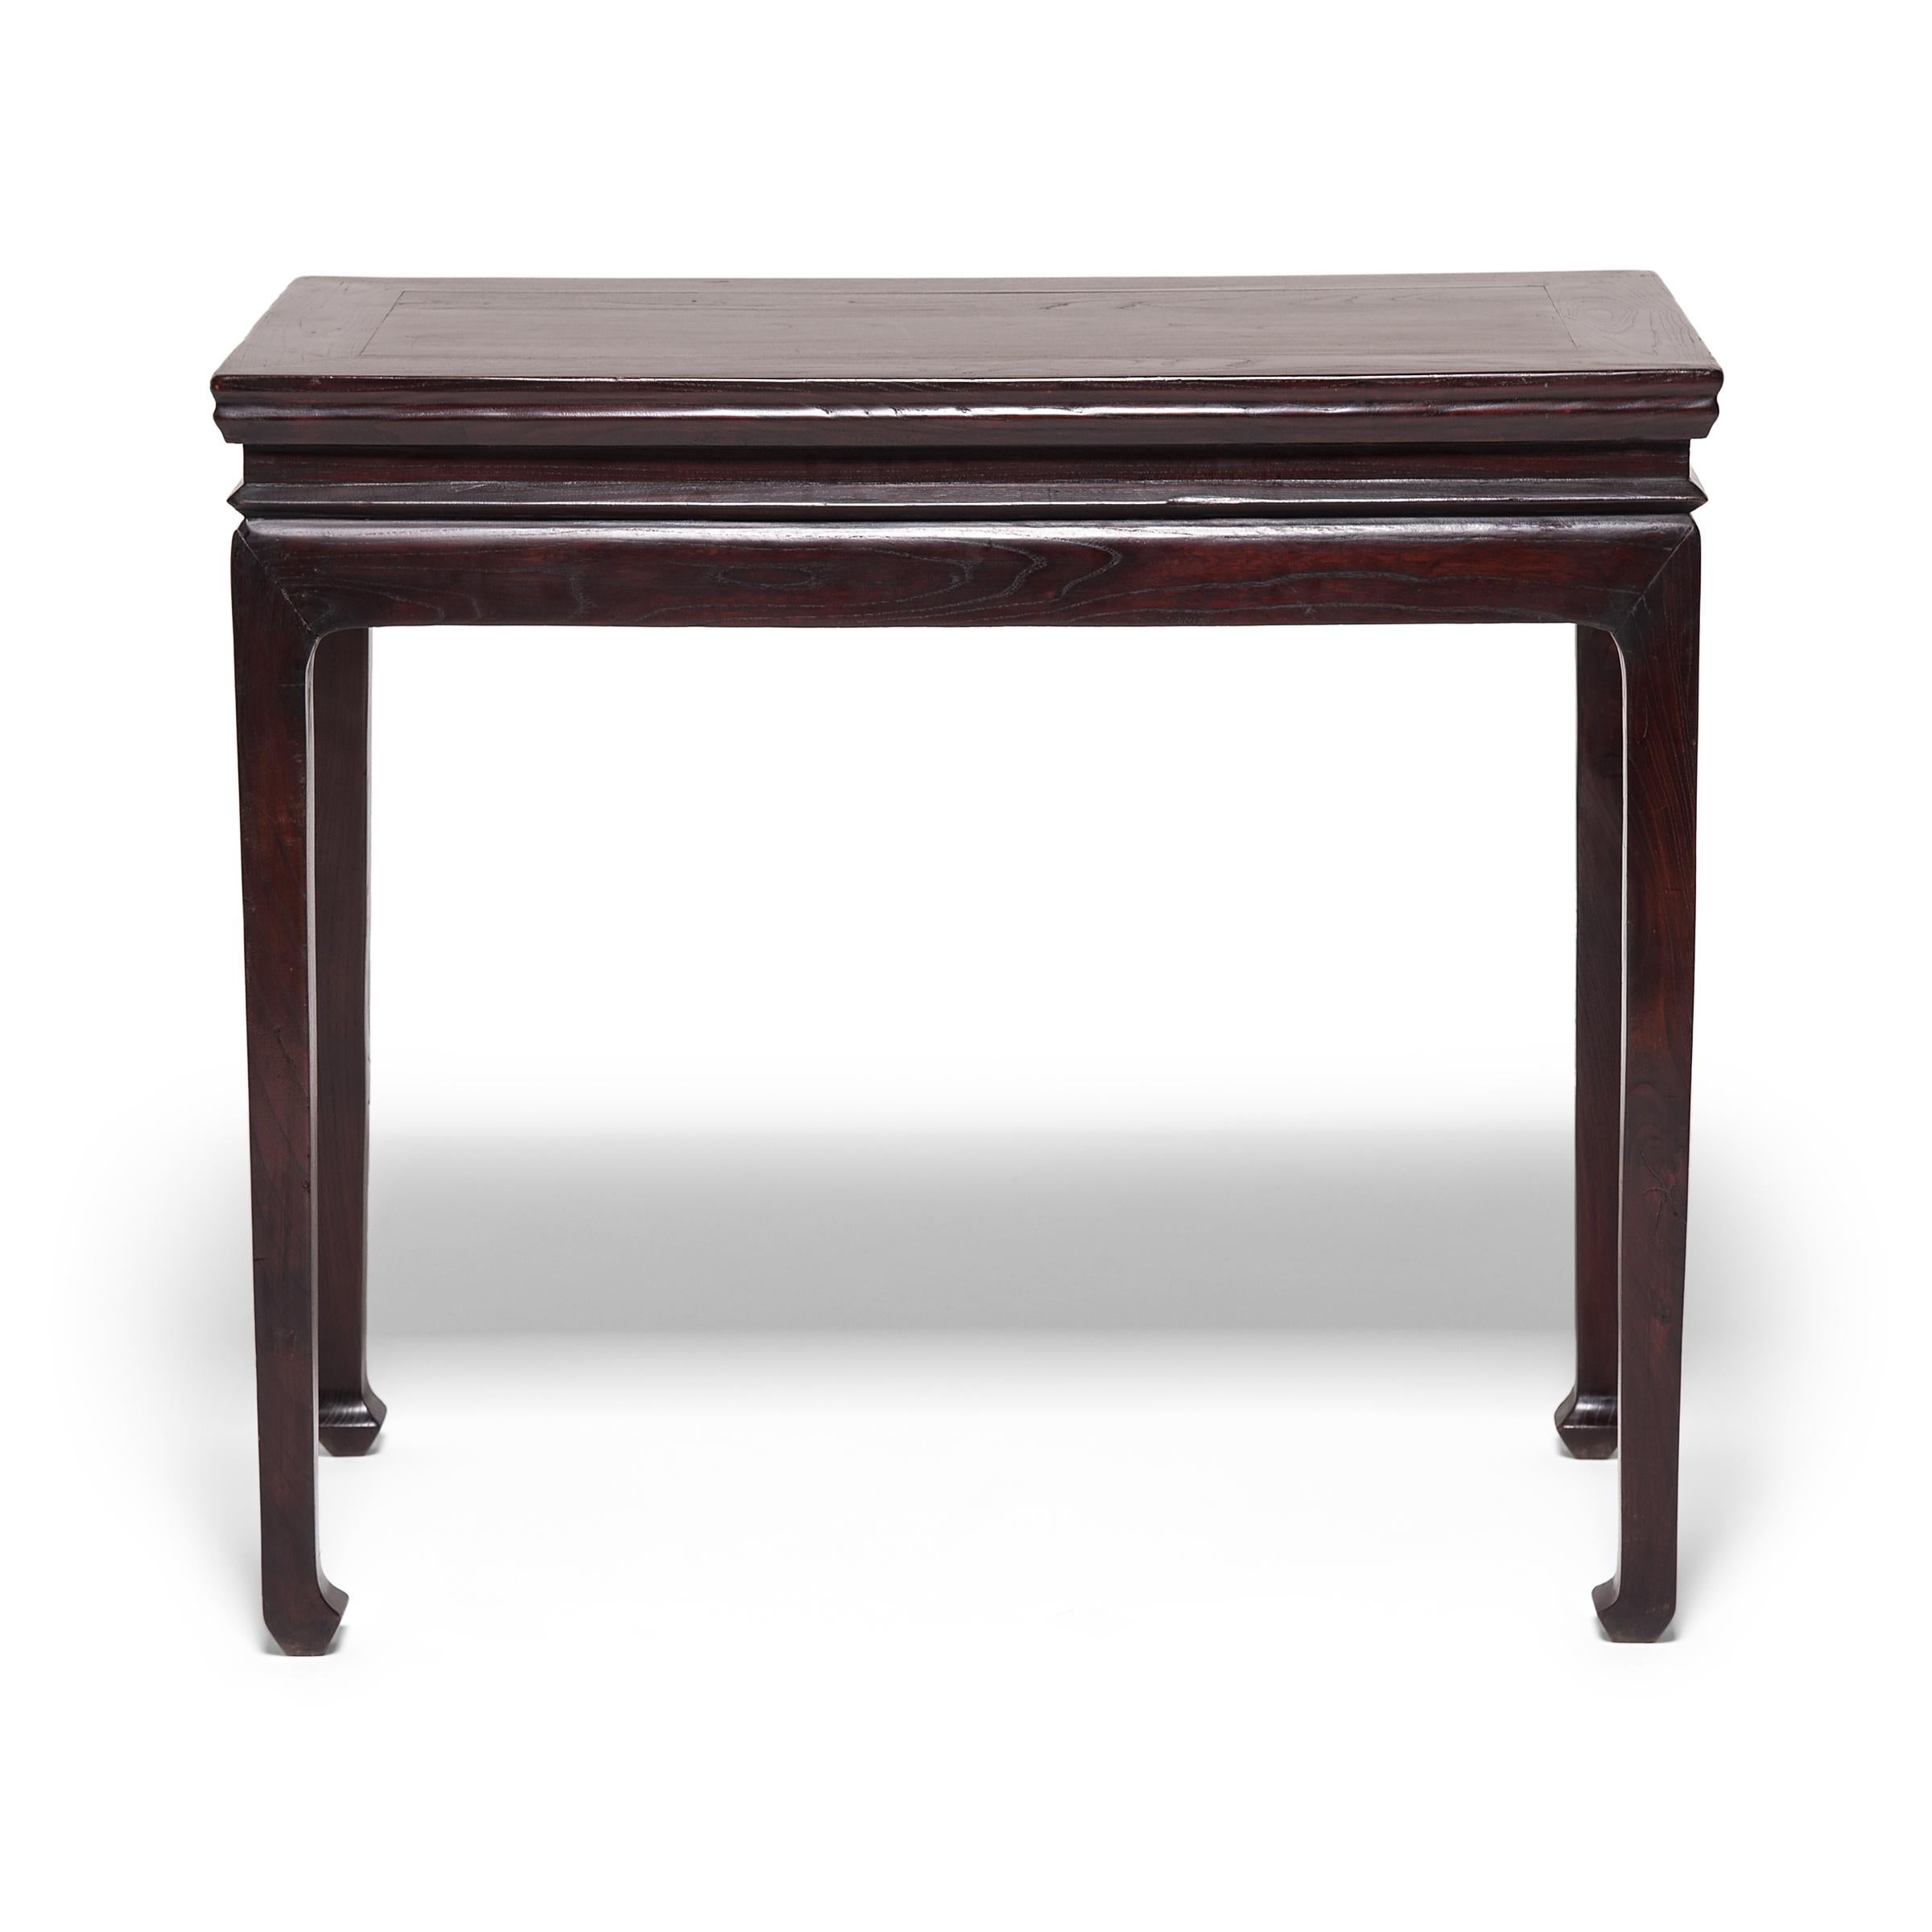 A tradition dating back to the northern Song dynasty, wine tables have been used for centuries at social gatherings as a spot to converse, sip wine, and make toasts. This 19th-century elmwood table celebrates this time-honored tradition with a